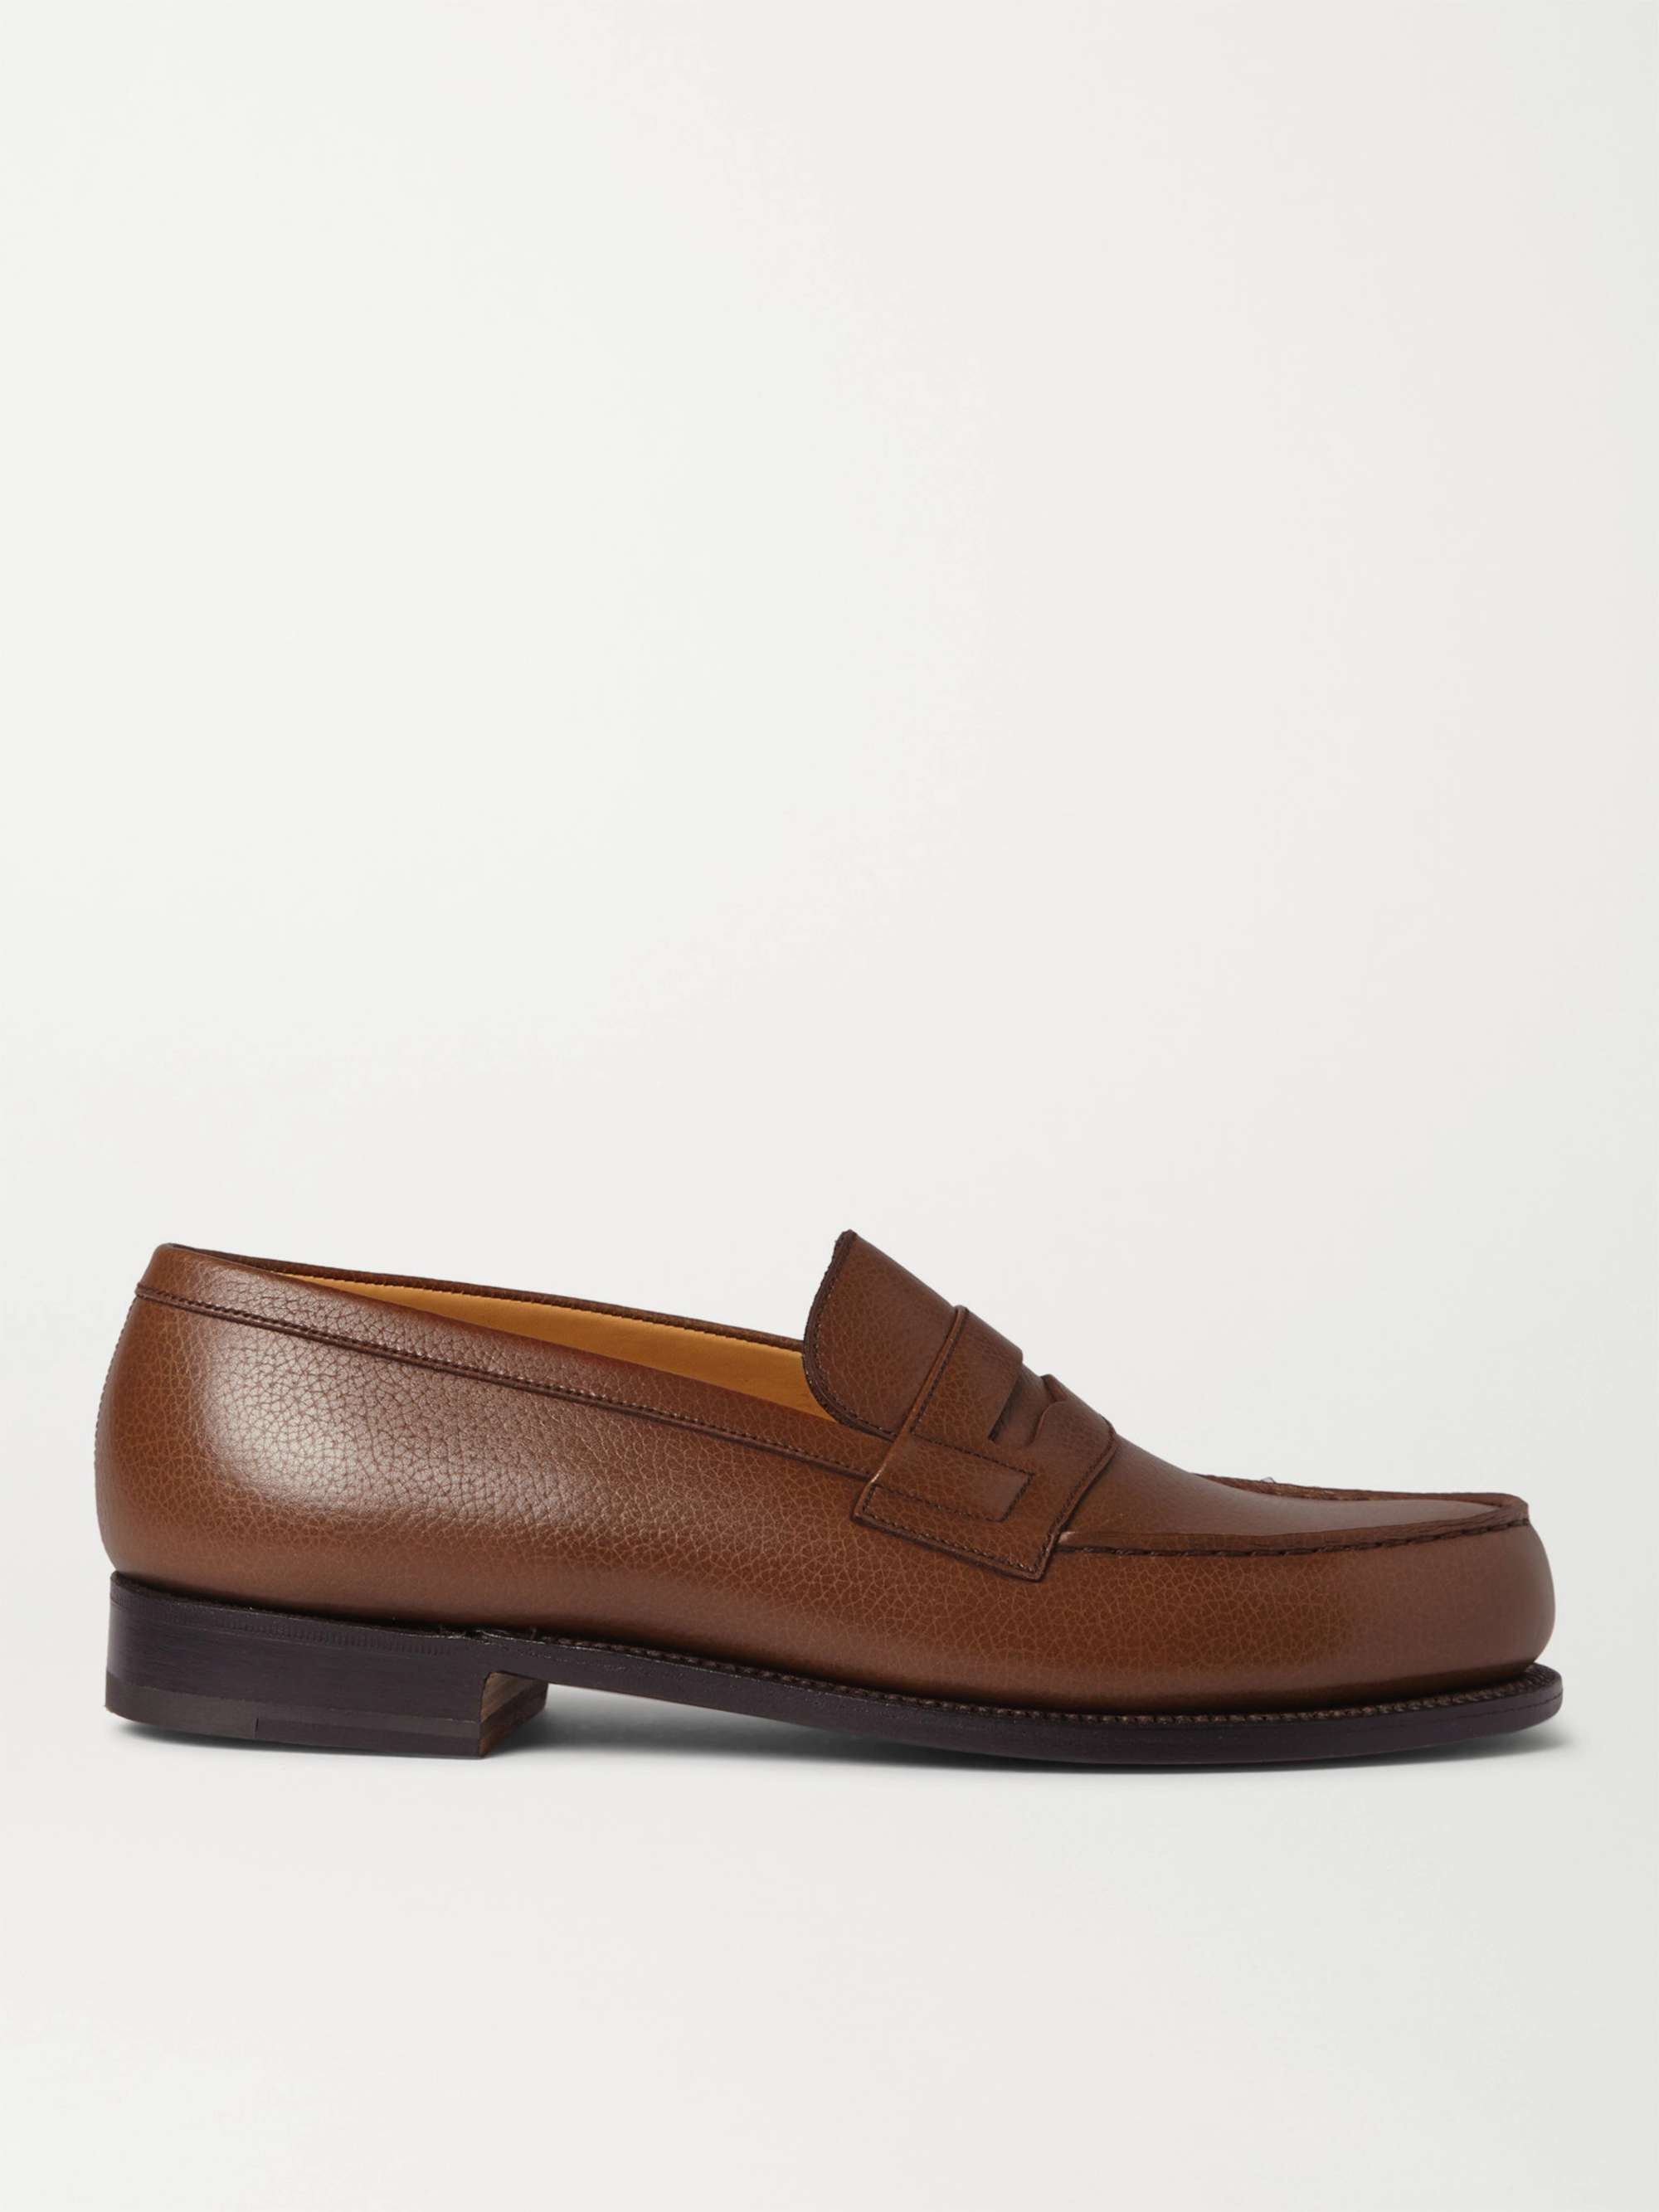 J.M. WESTON 180 Moccasin Grained-Leather Loafers | MR PORTER